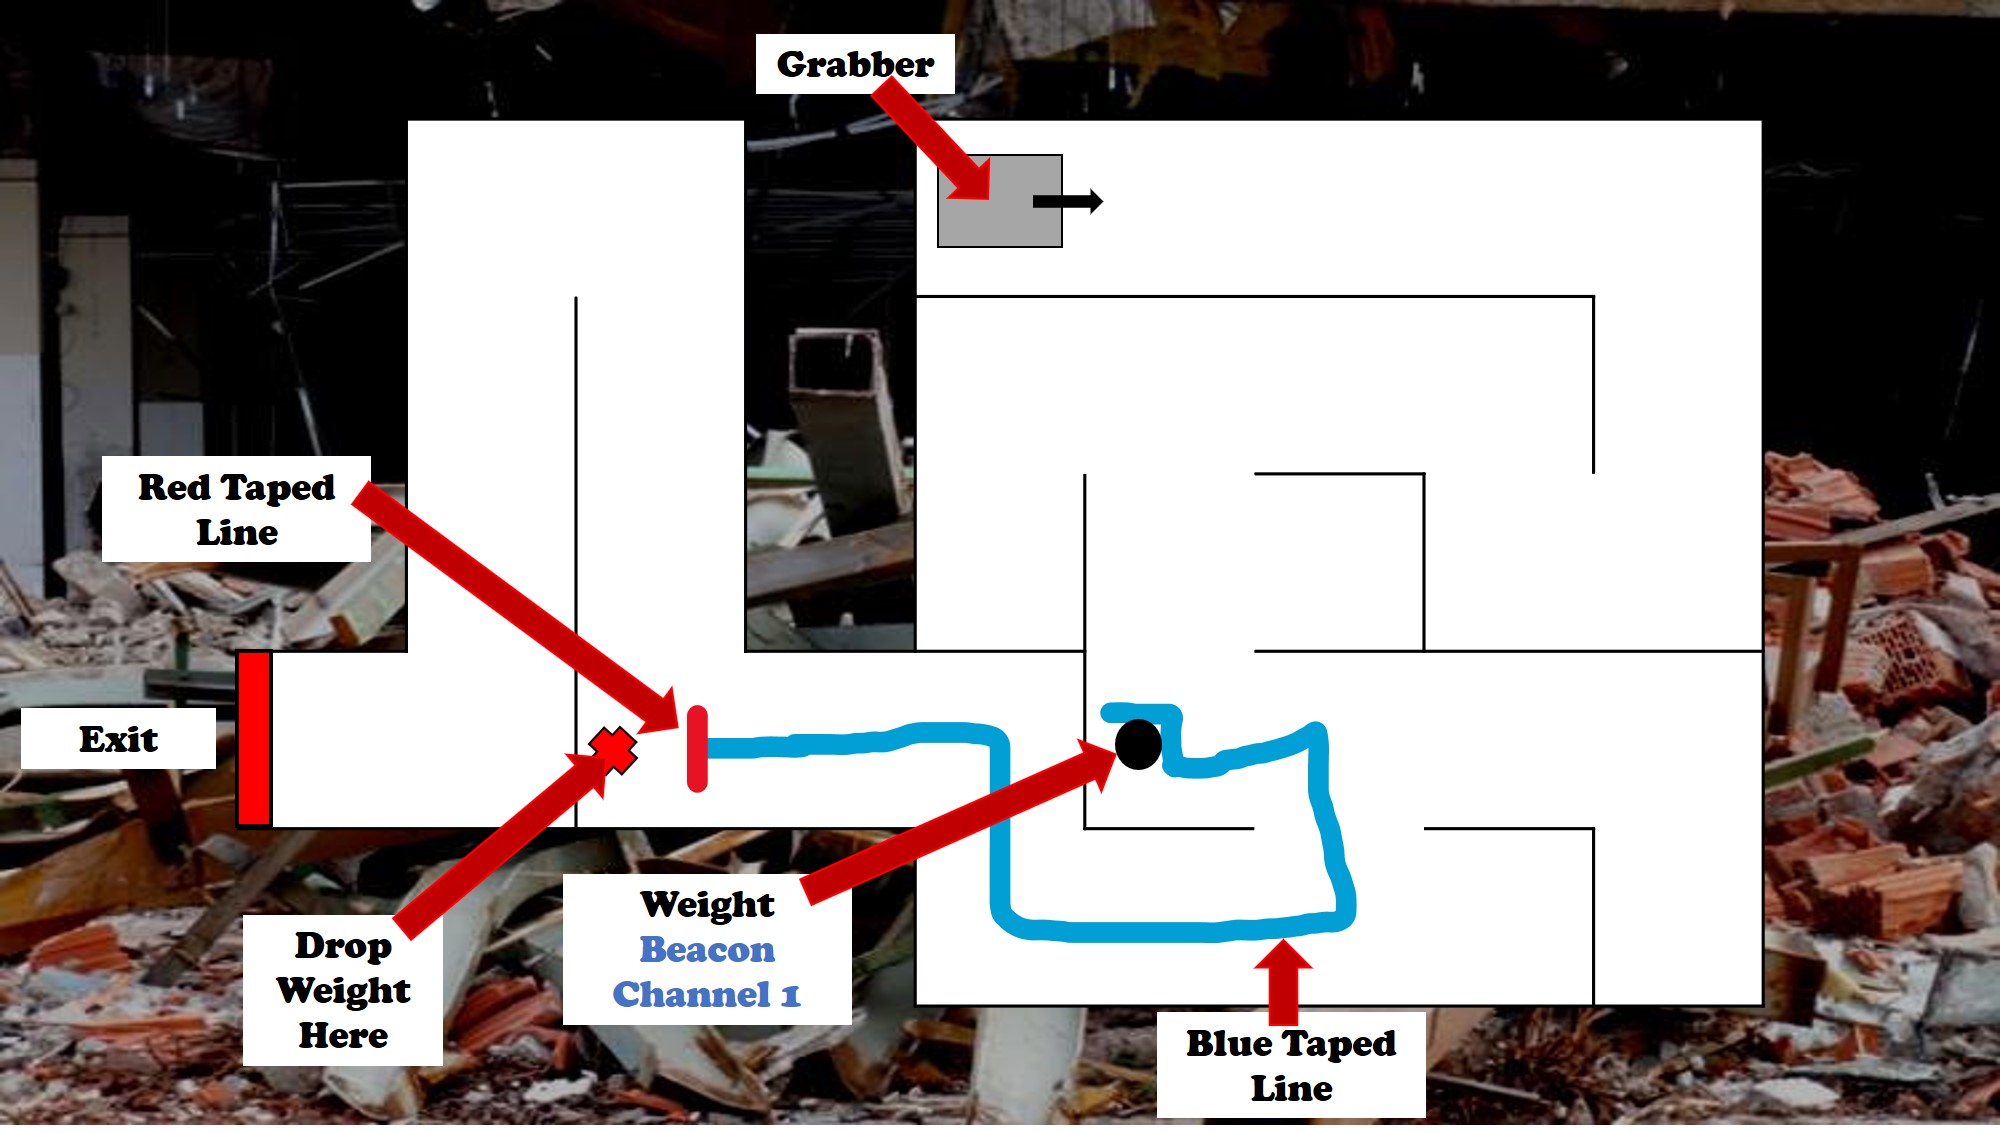 The Grabber unit starts in a different position within the maze. Needs to find and collect the weight (beacon channel 2) then follow a blue line out of the maze. When it reaches the red line end point it needs to drop the weight before negotiating a corridor of right-angled turns in both directions to the exit.